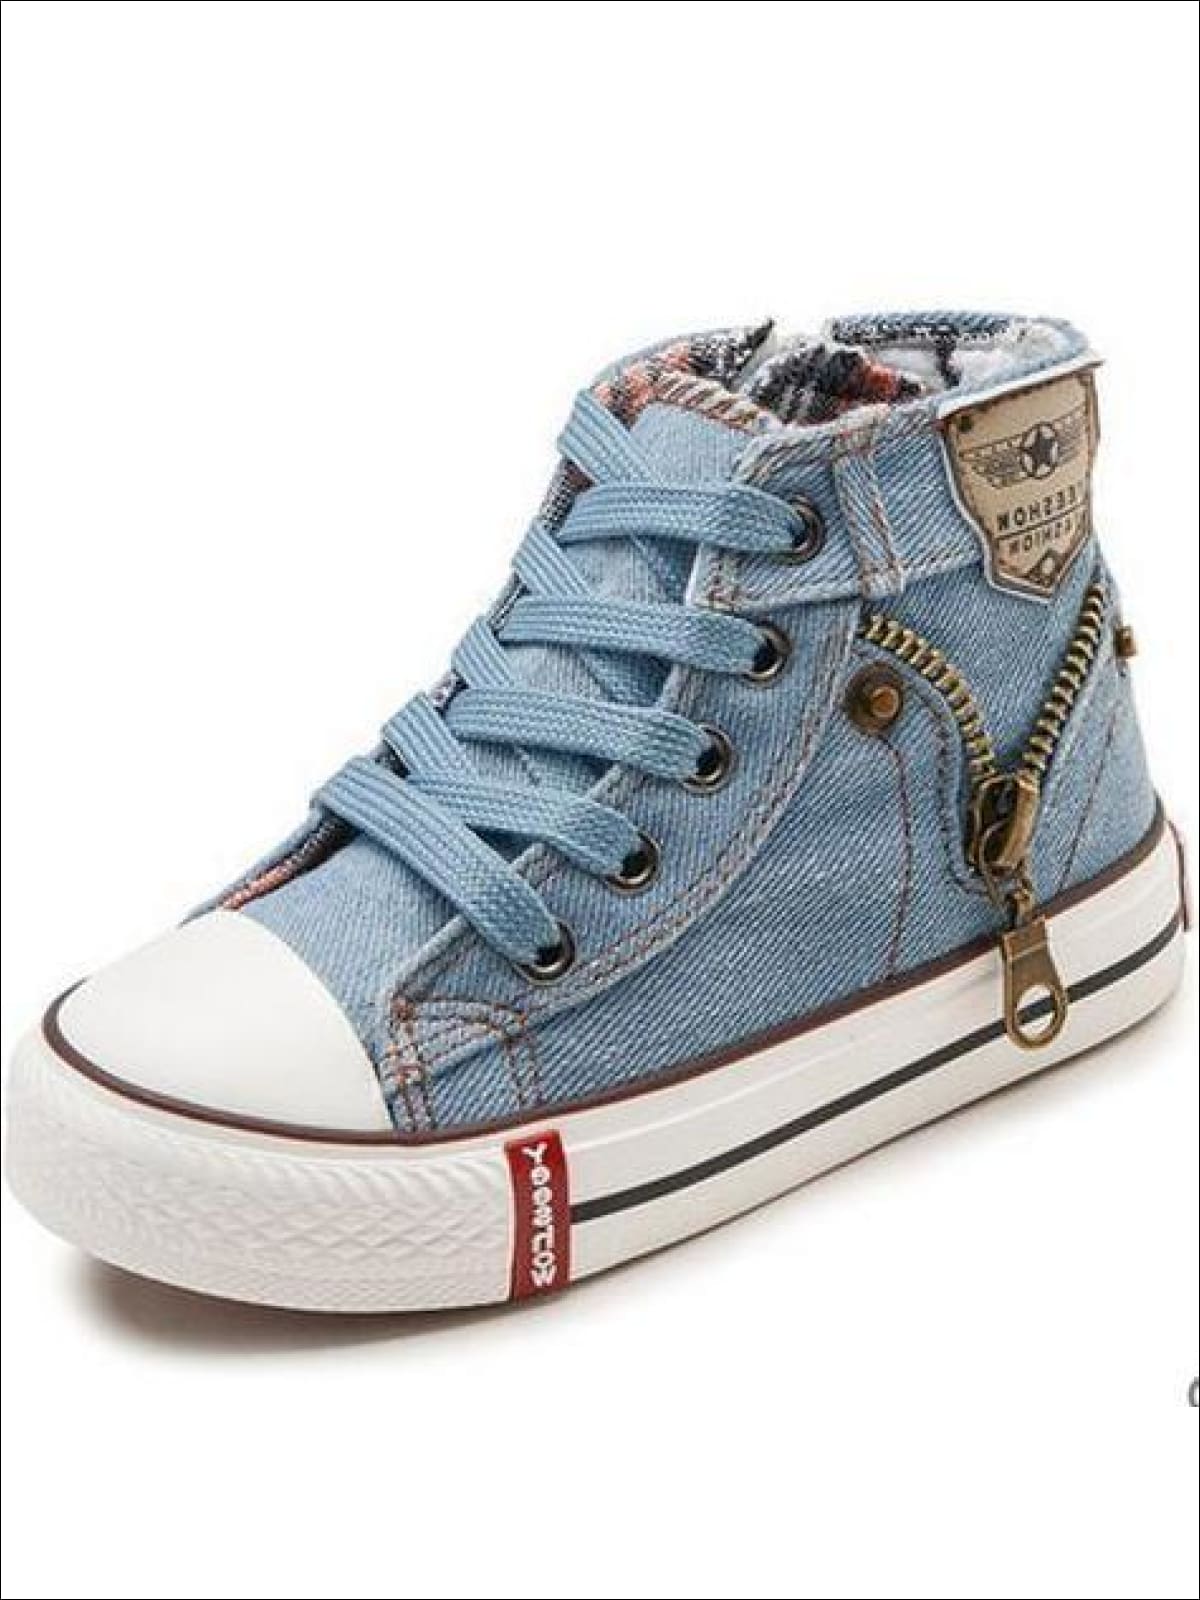 Denim High Top Trainers, KIDLY Label Shoes & Trainers, Blue, EU 30